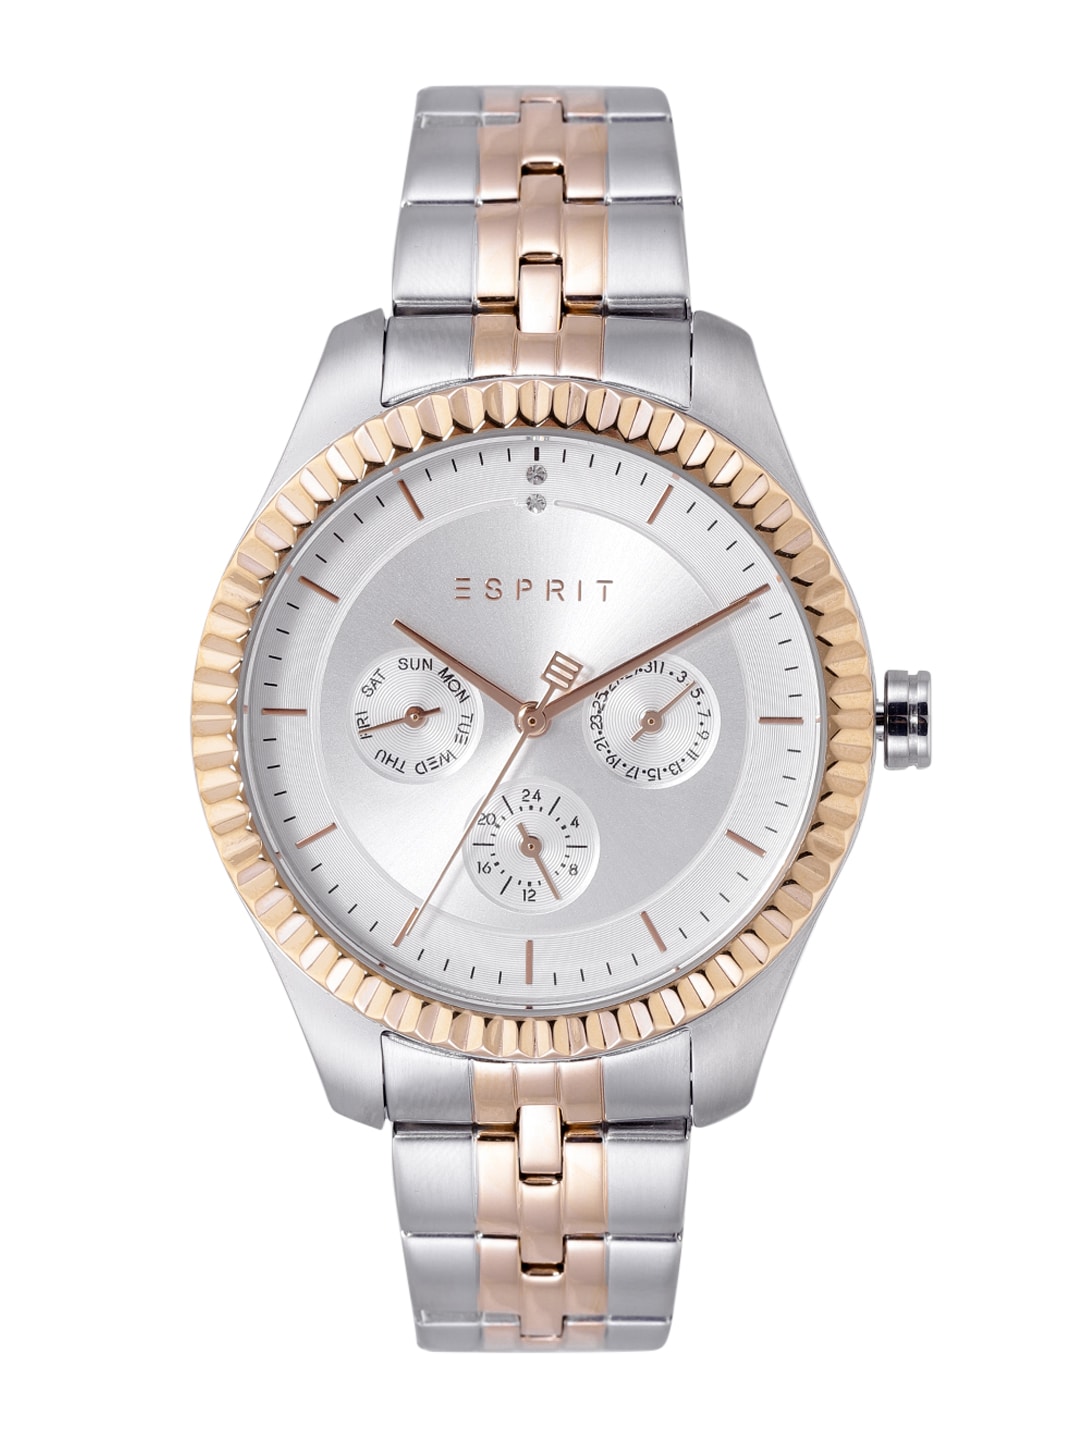 ESPRIT Women Silver-Toned Analogue Chronograph Watch ES1L202M0115 Price in India